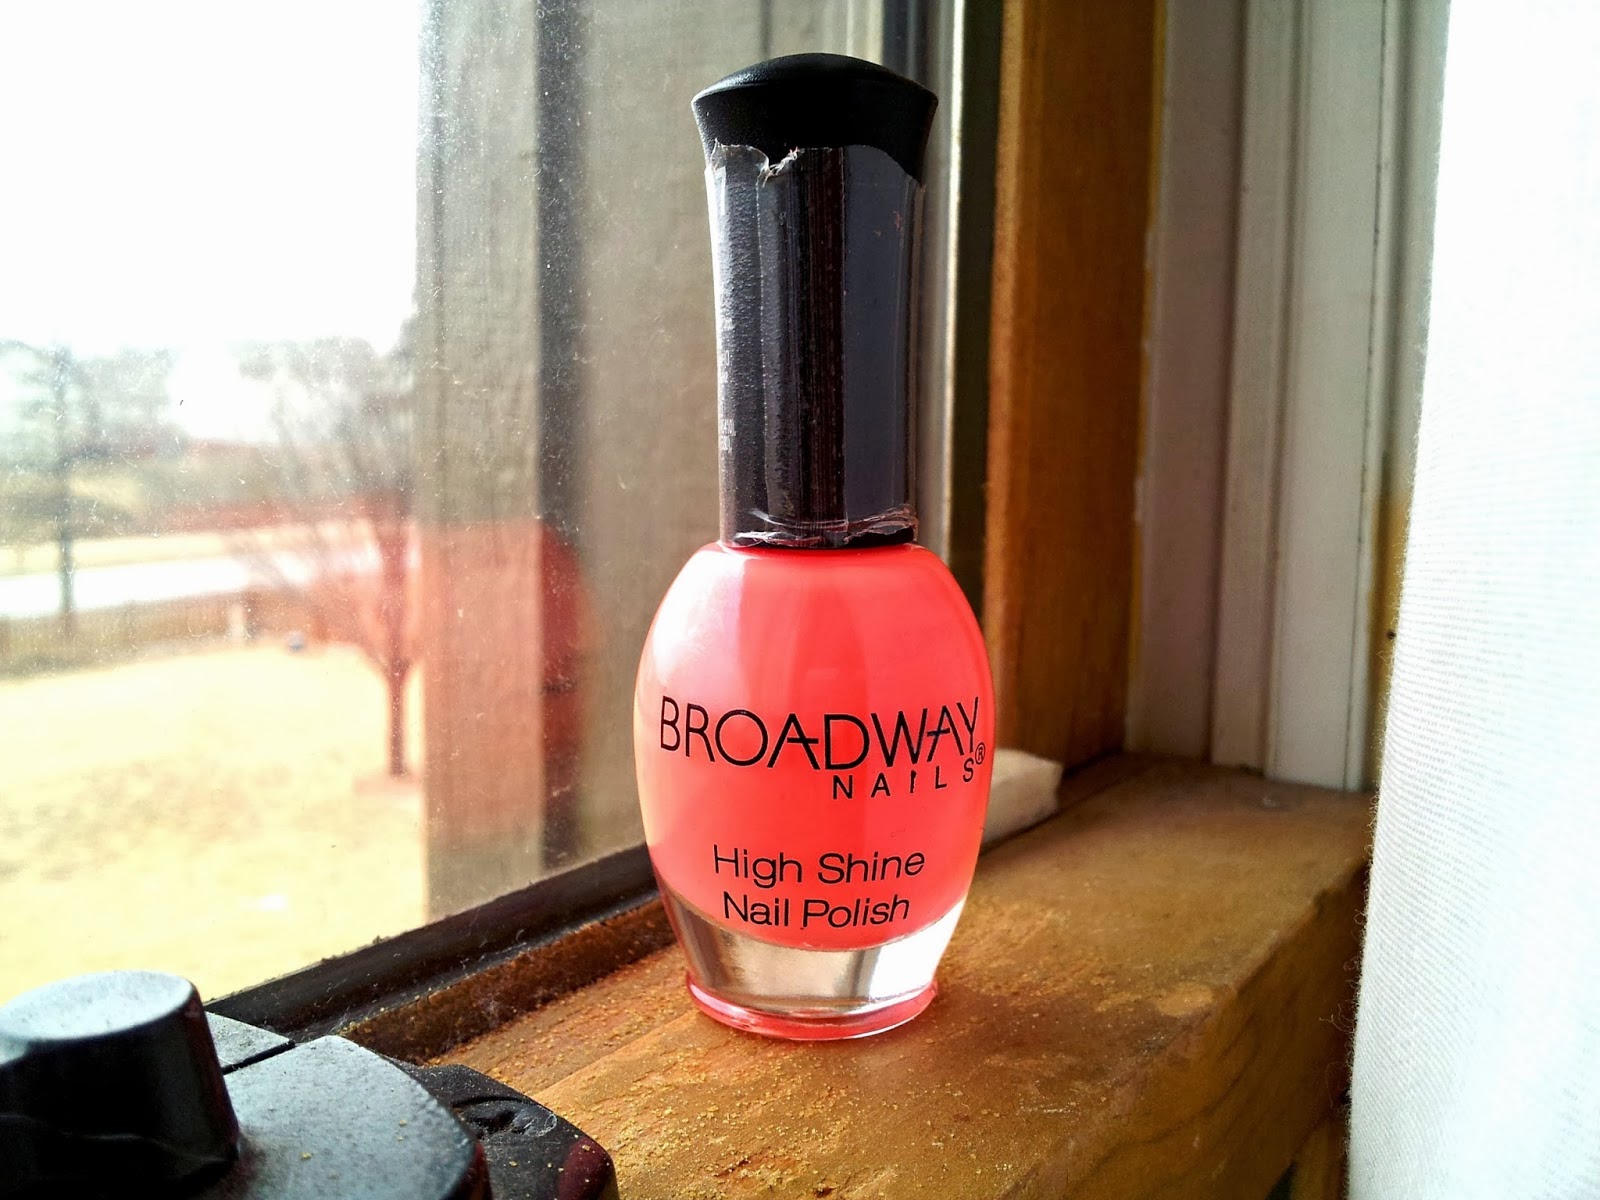 2. Broadway Nails Quick Dry Nail Polish in Color 40 - wide 3